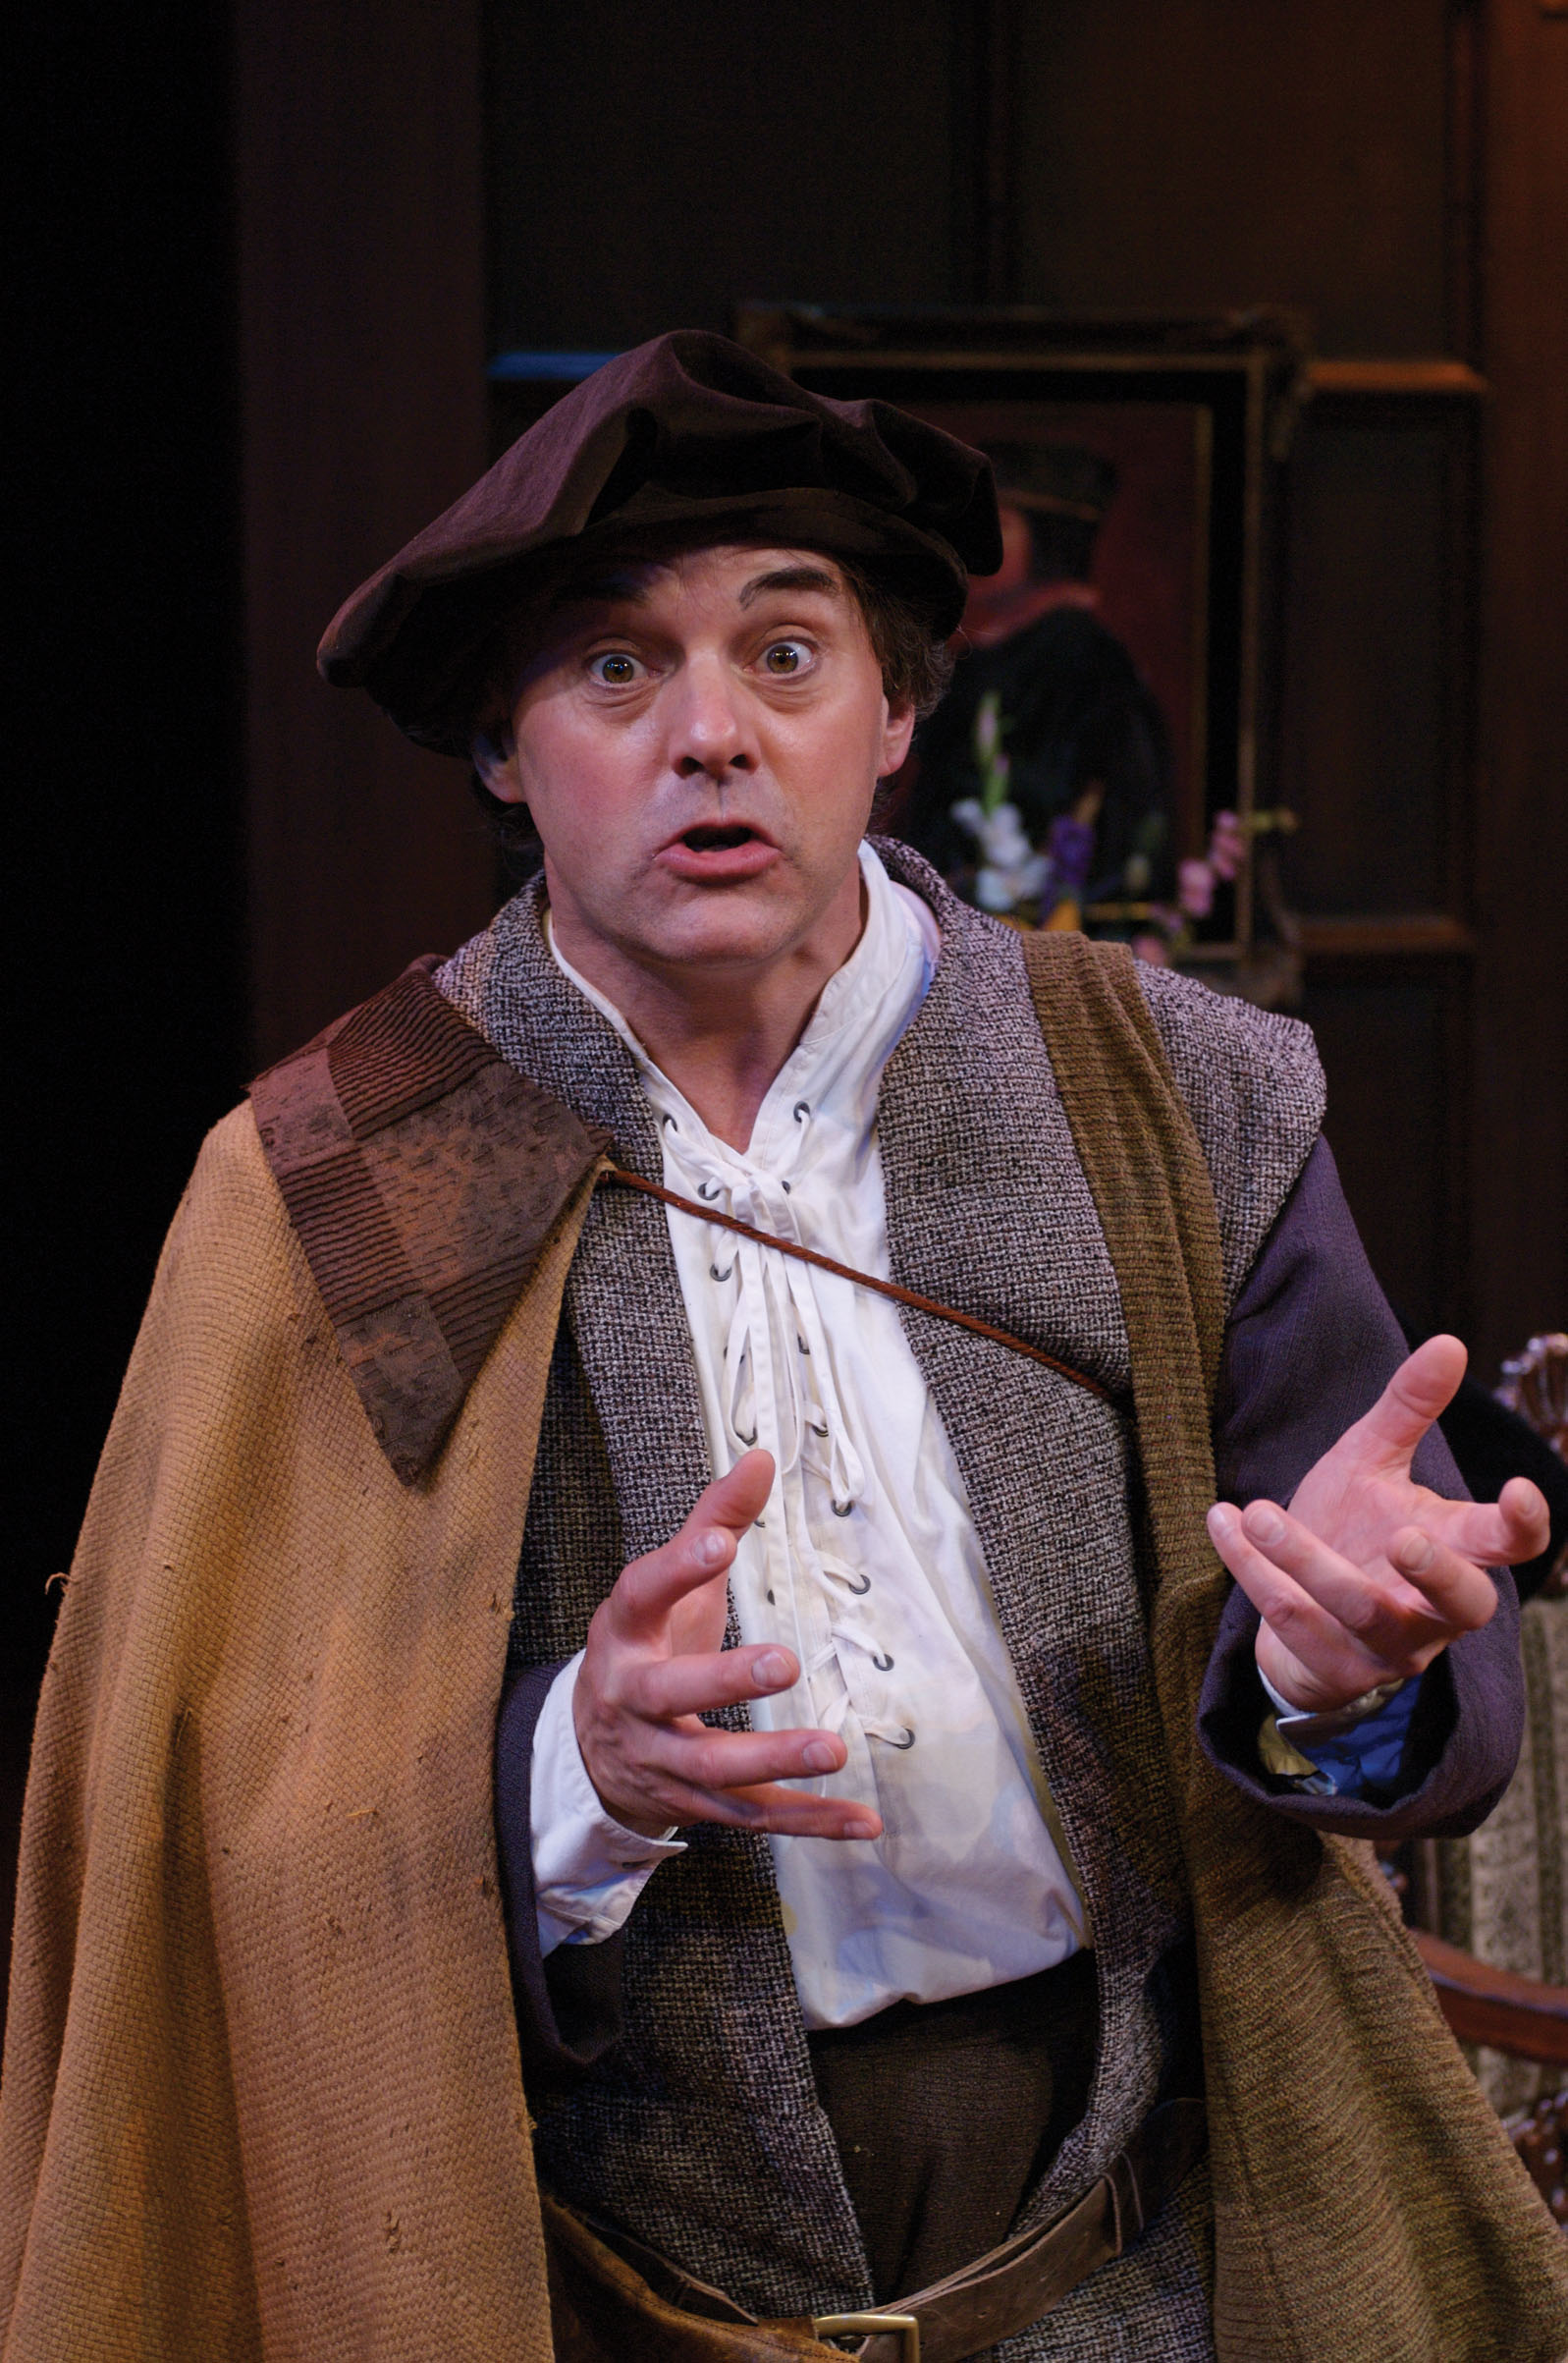 Rick Ford as Simple at The Utah Shakespearean Festival in The Merry Wives of Windsor